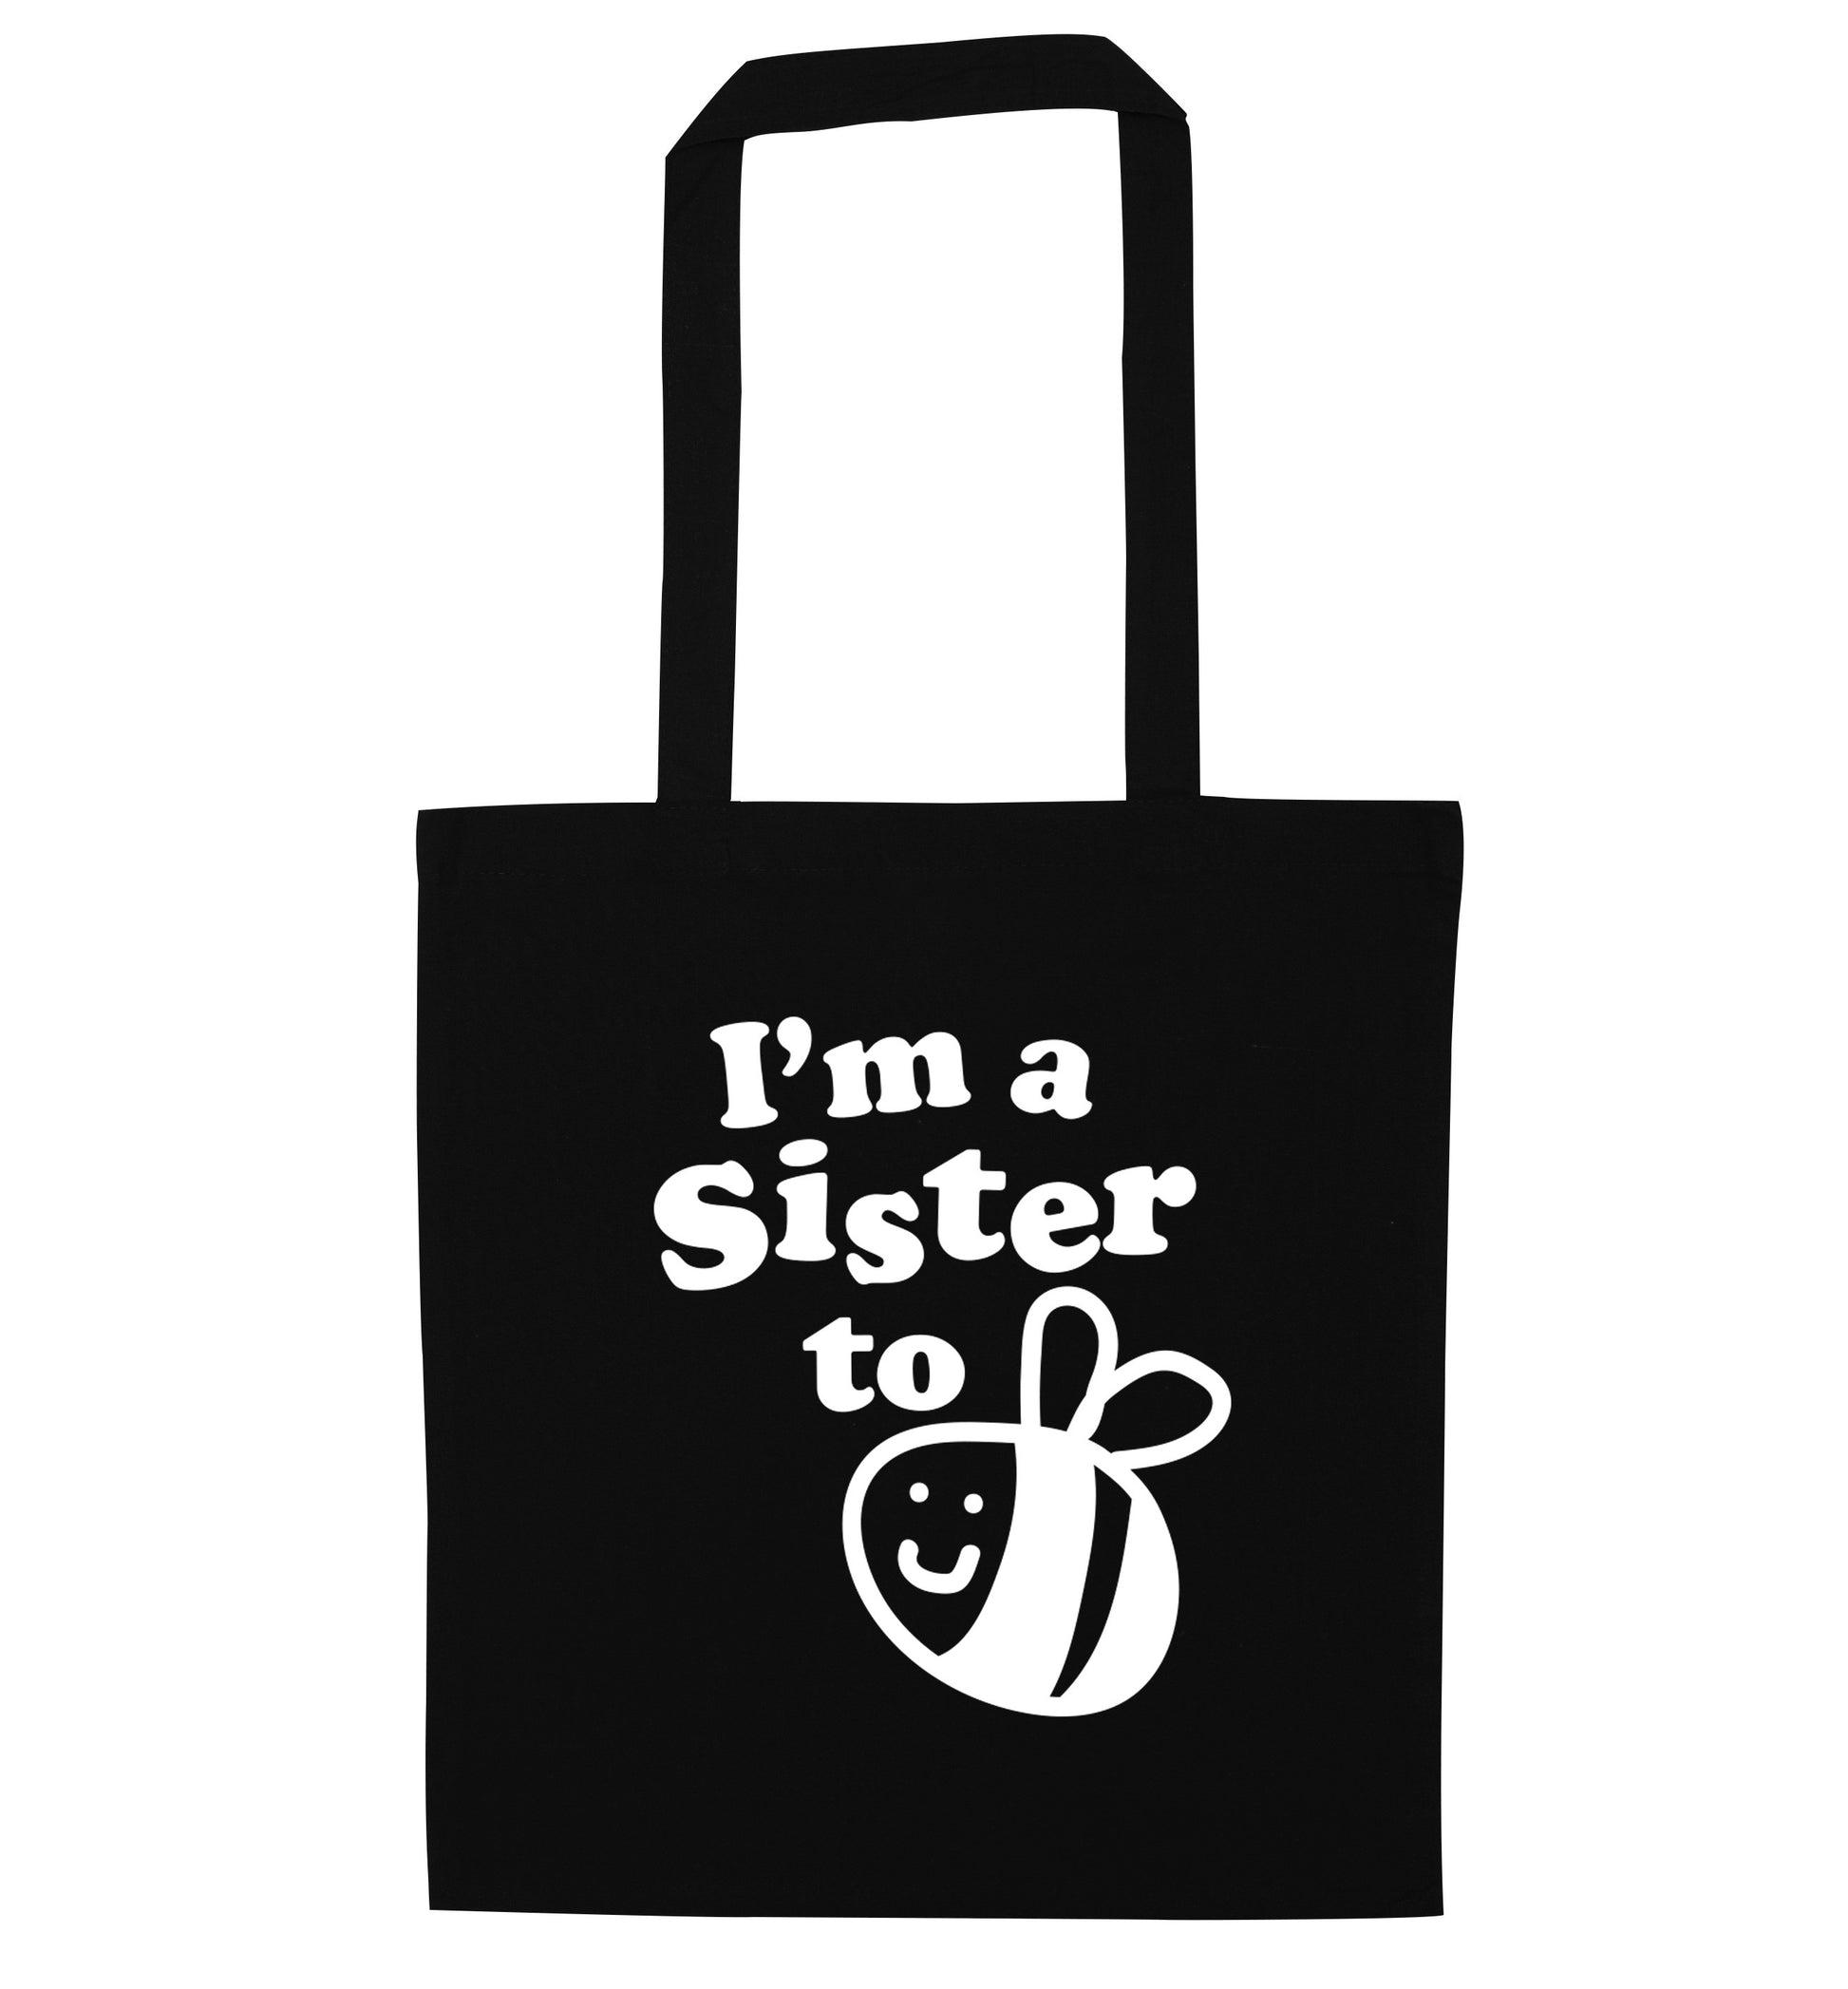 I'm a sister to be black tote bag